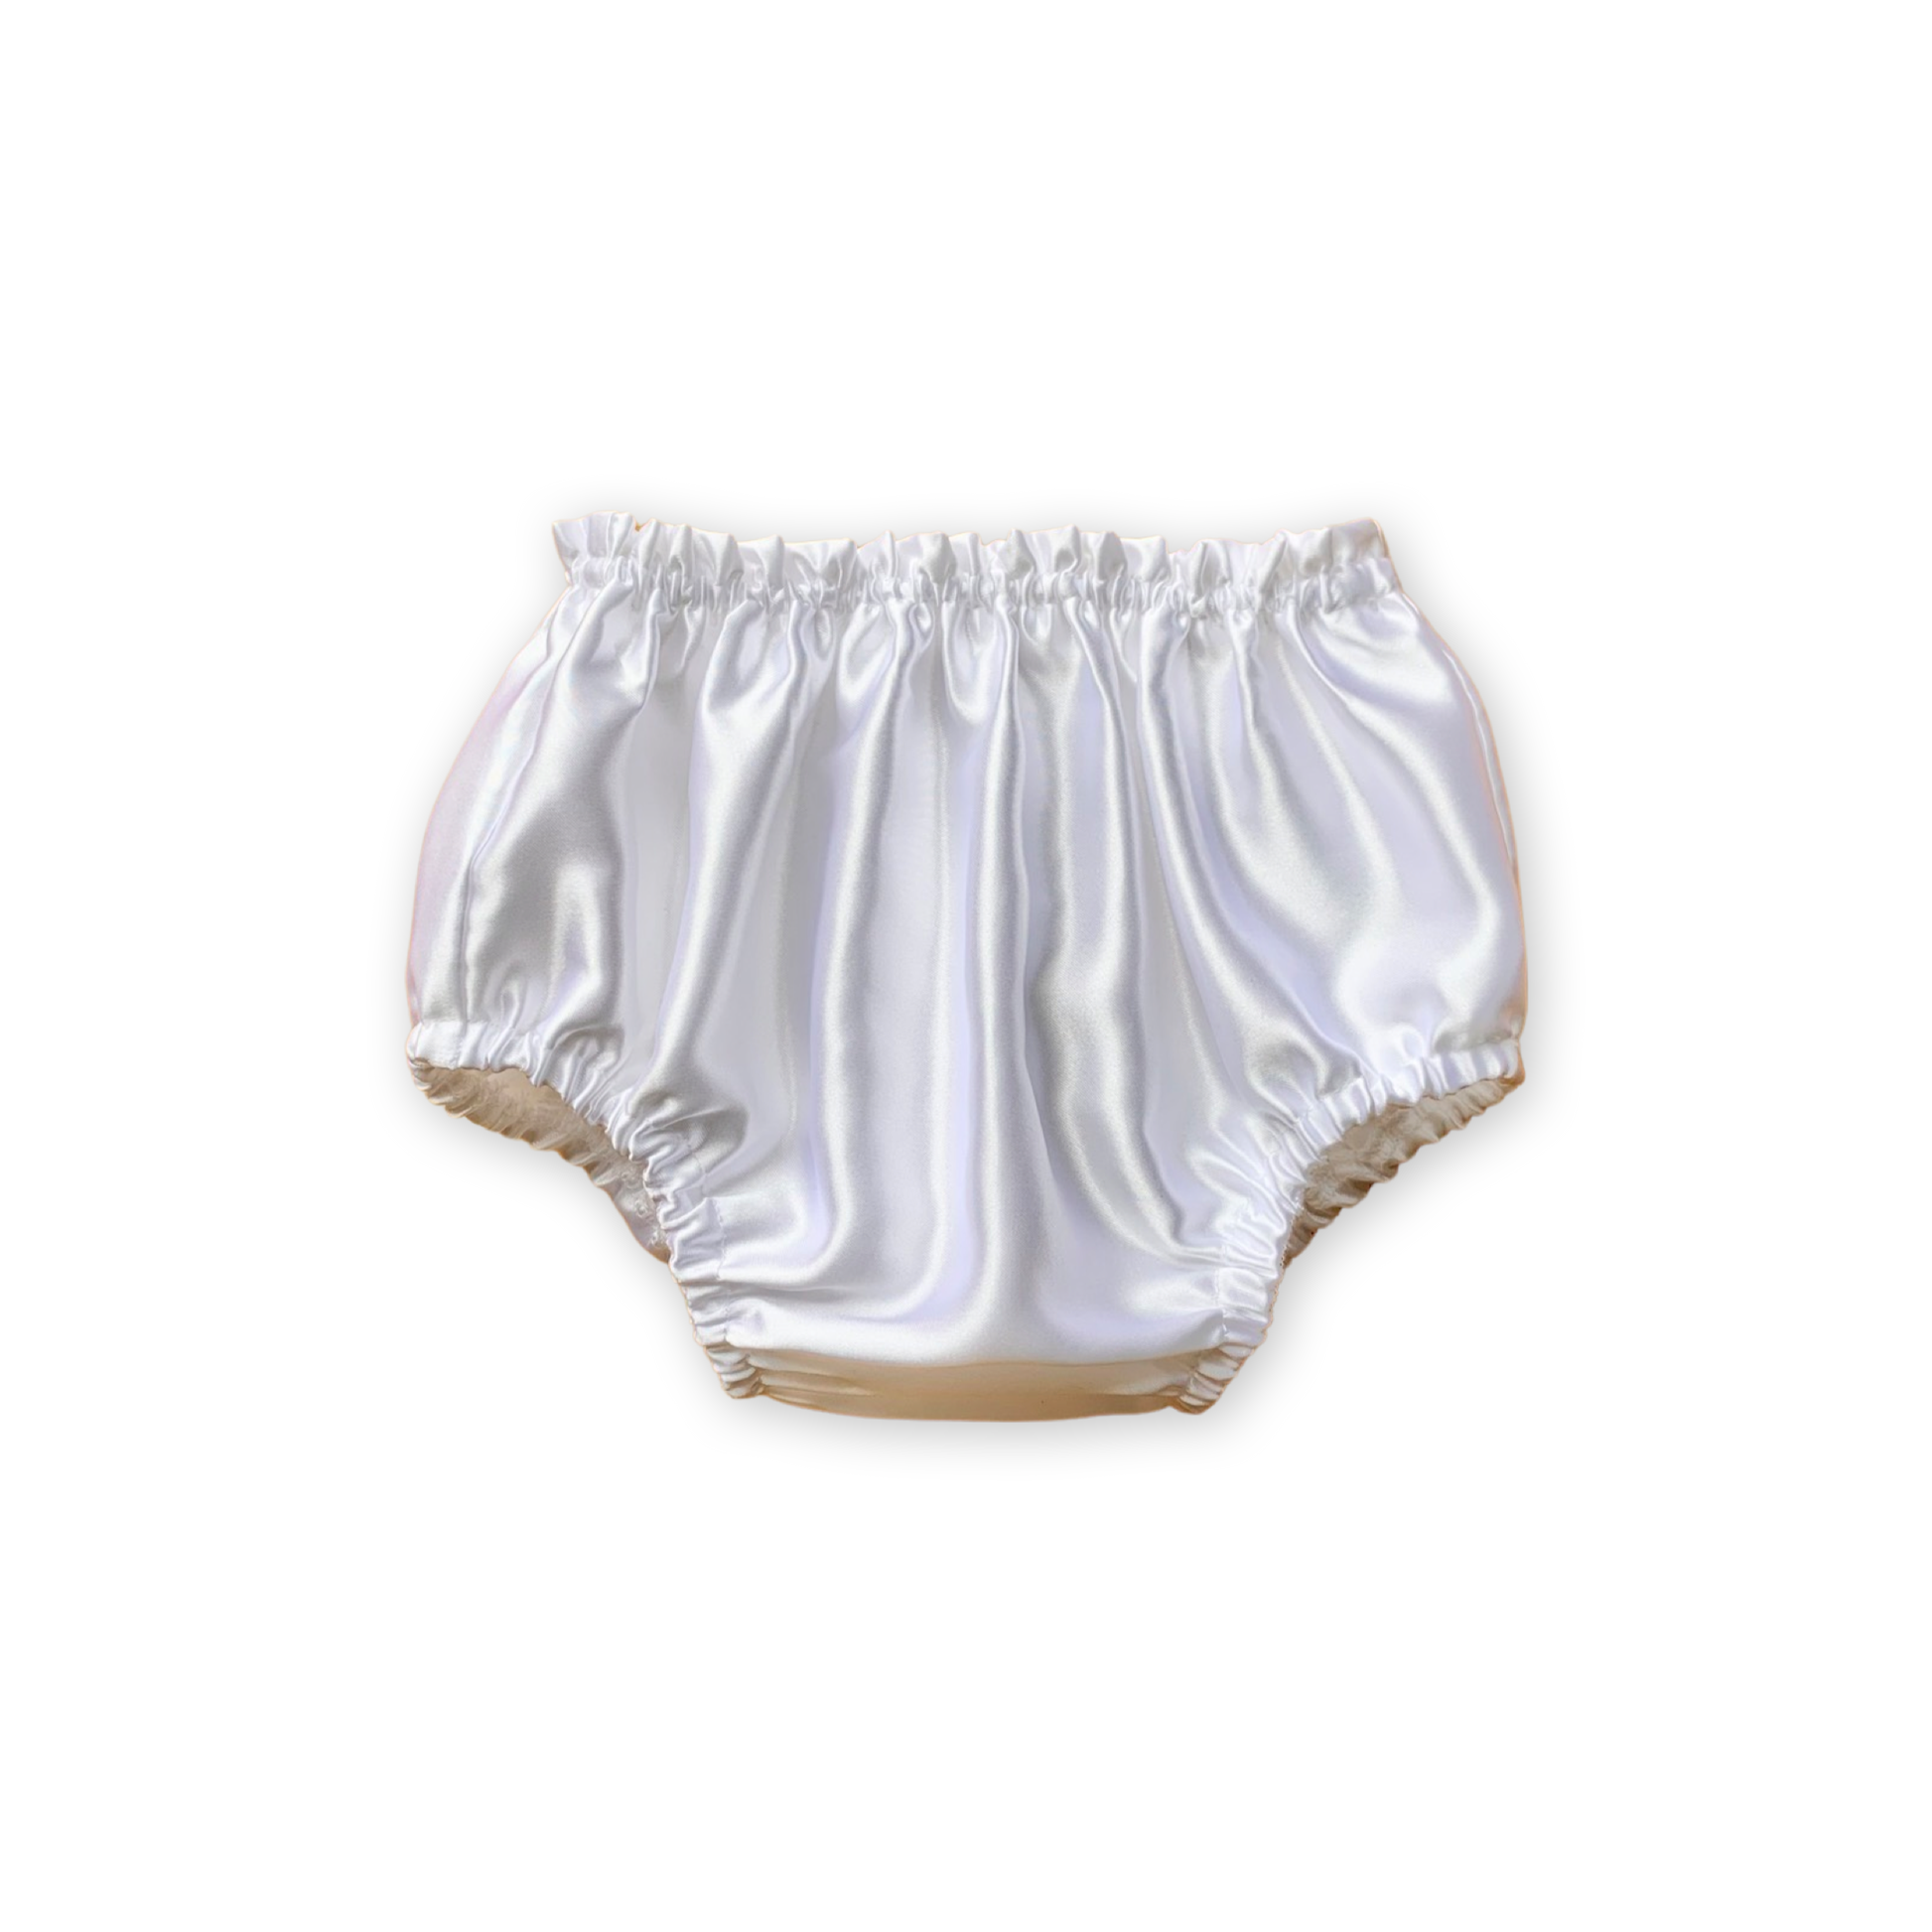 Satin Bloomers – ChloeBellBoutique